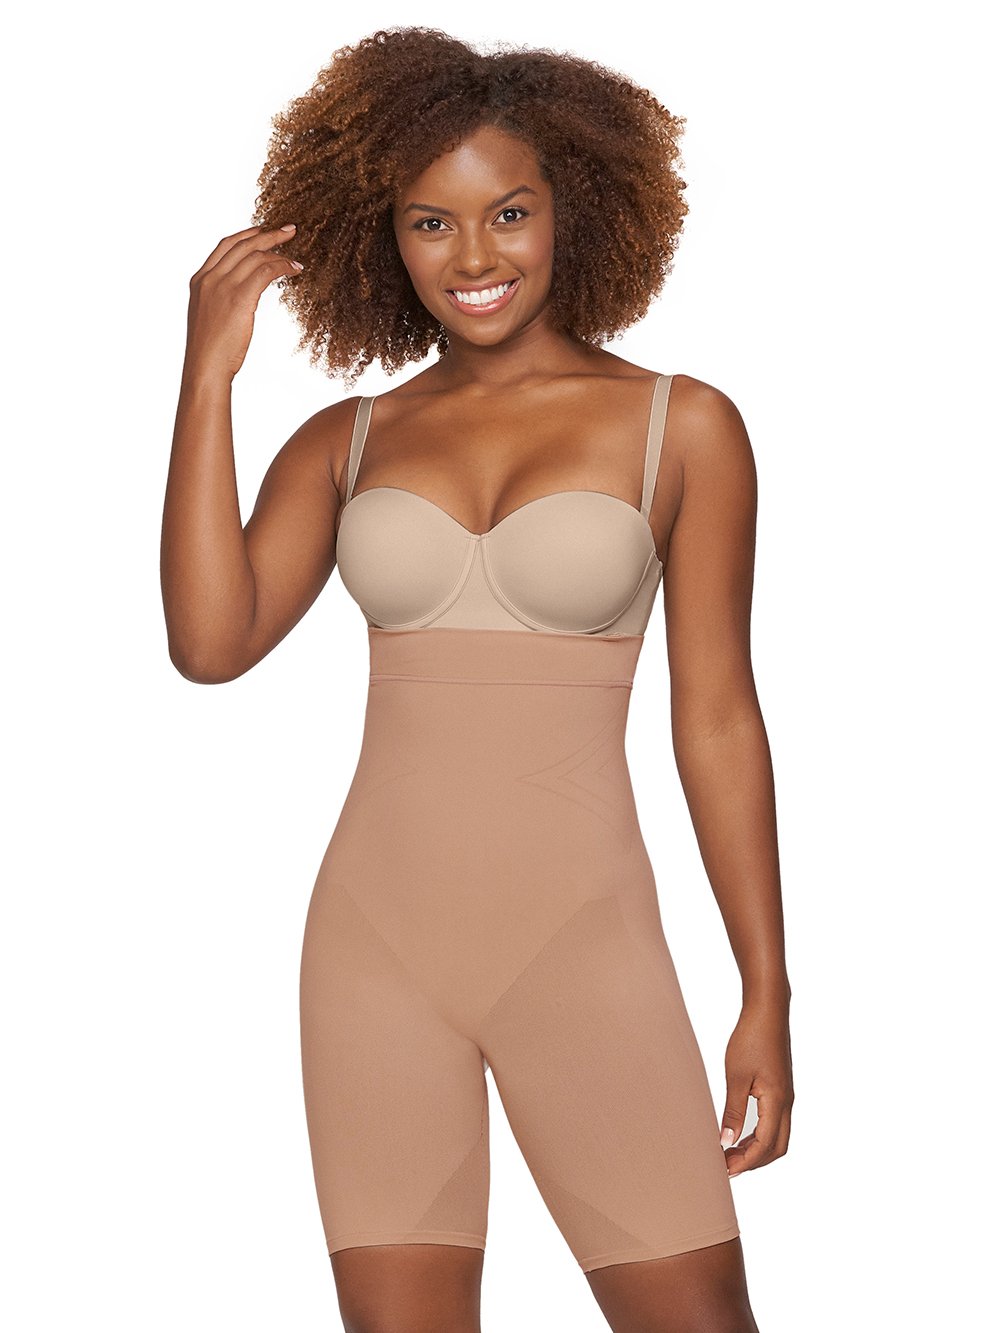 Leonisa Shapewear Black / XS/S Invisible Extra High-Waisted Butt Lifter Shaper Short